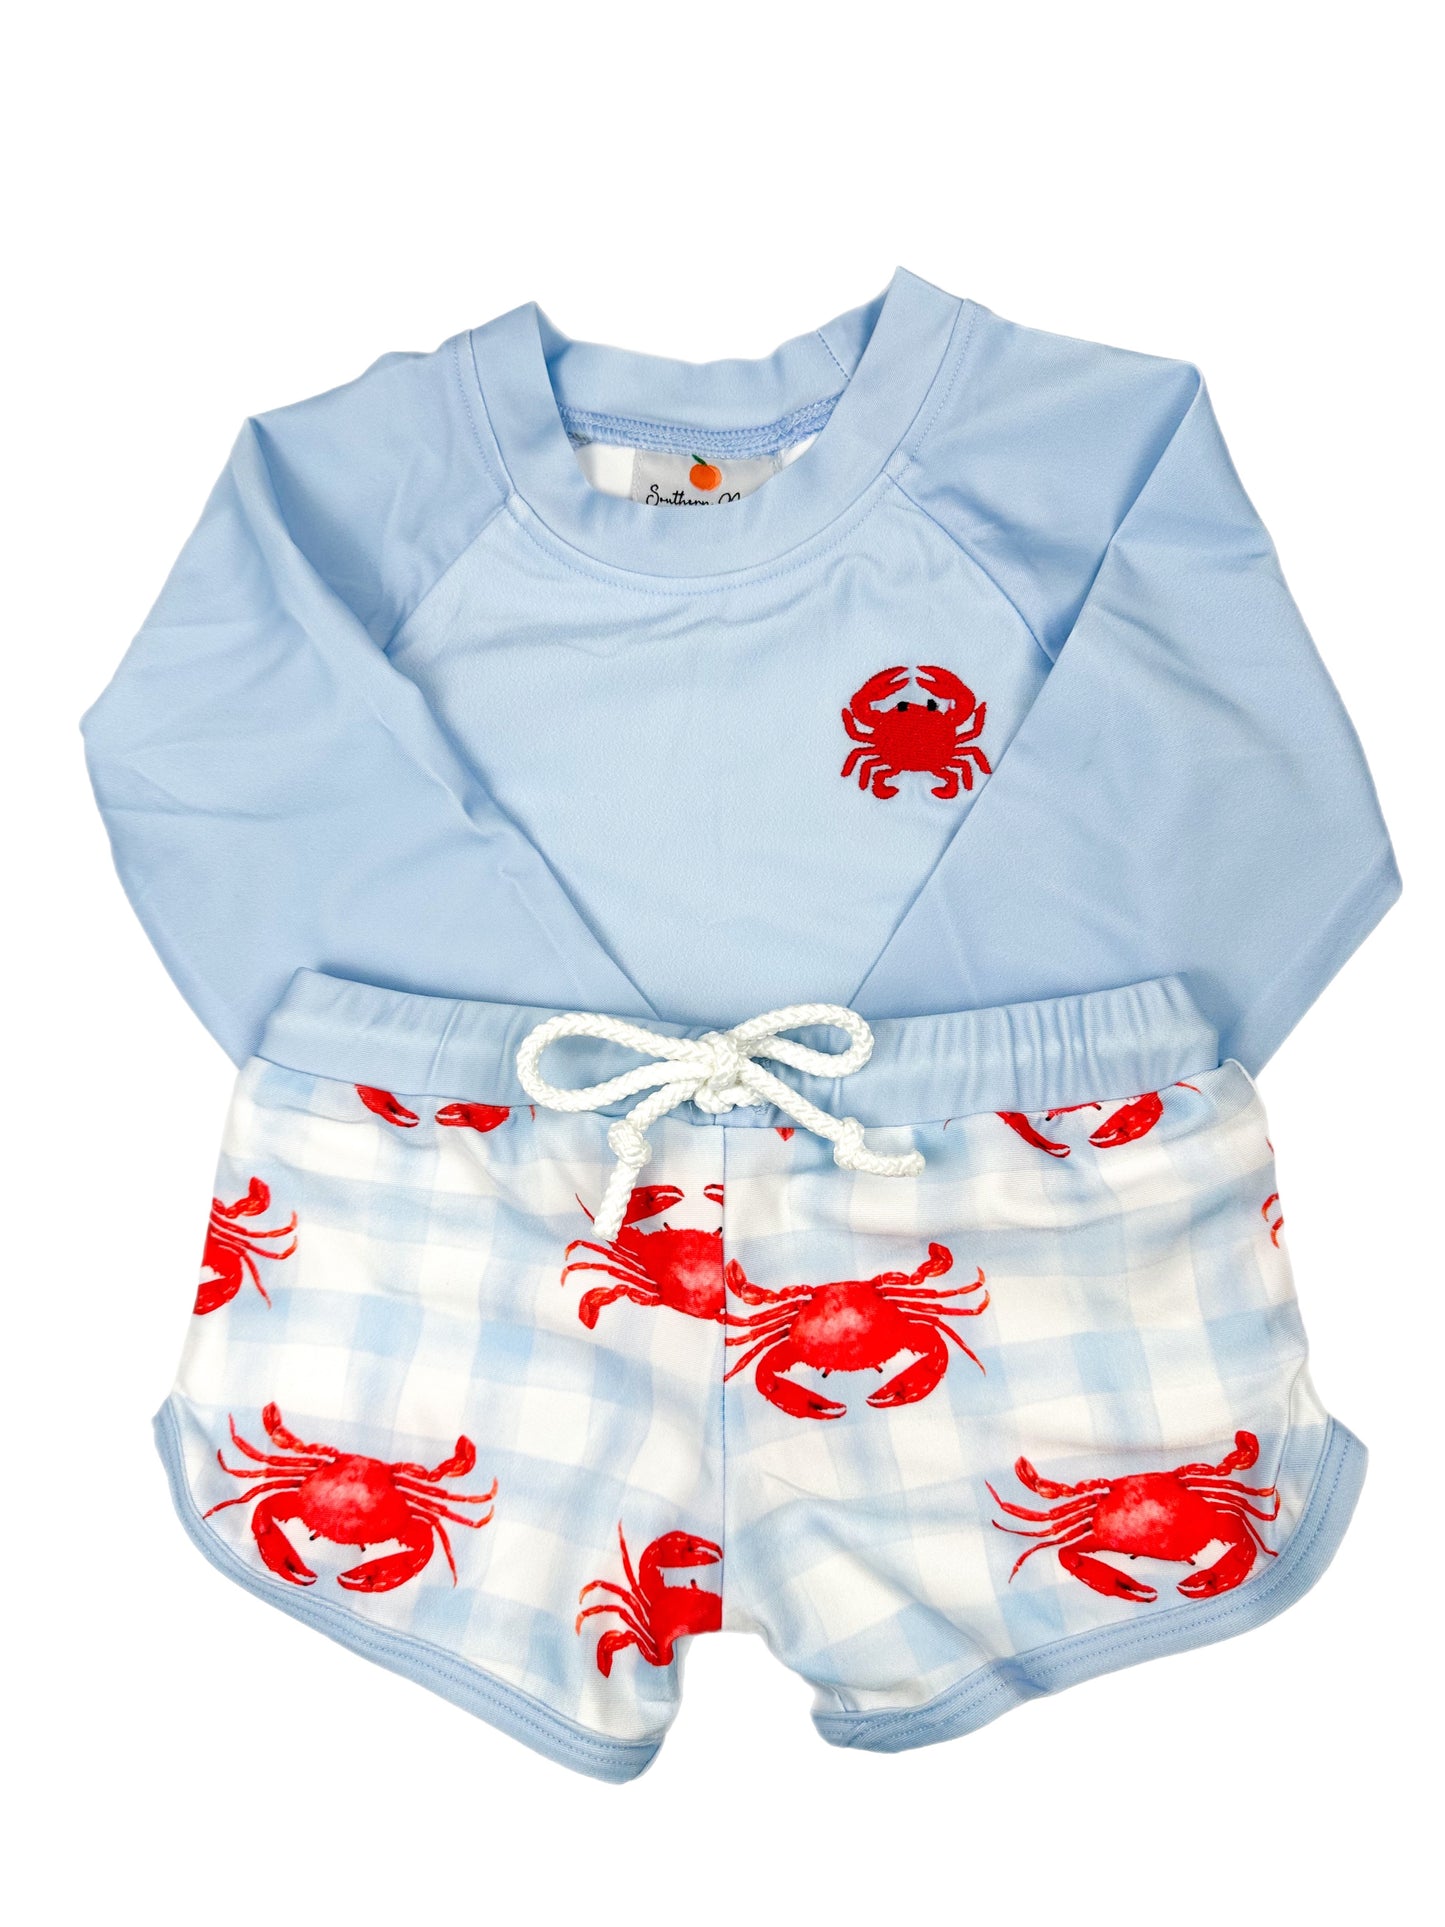 swim suit set for boys with crabs